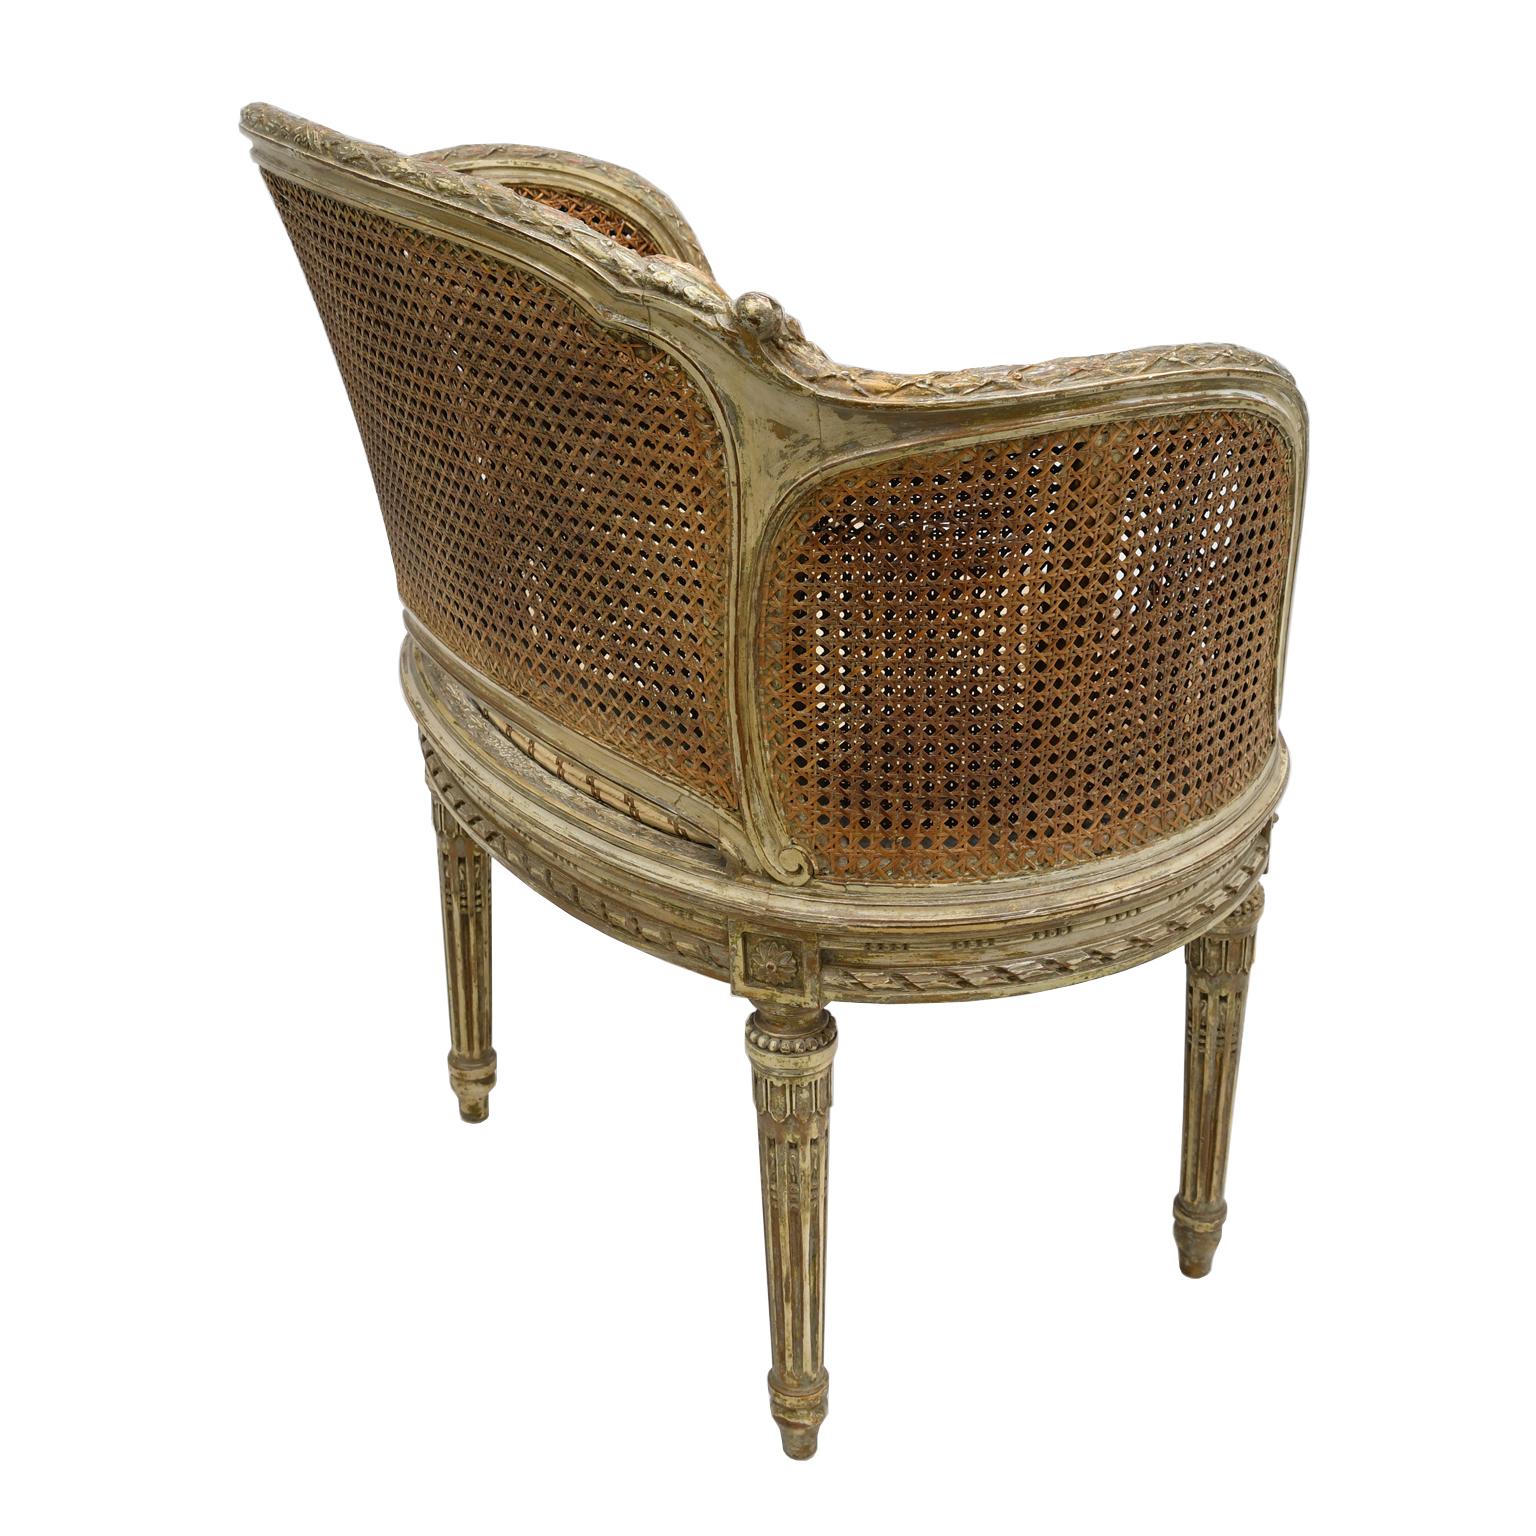 Silk Antique French Louis XVI Style Polychrome and Gilt Barrel Desk Chair with Caning